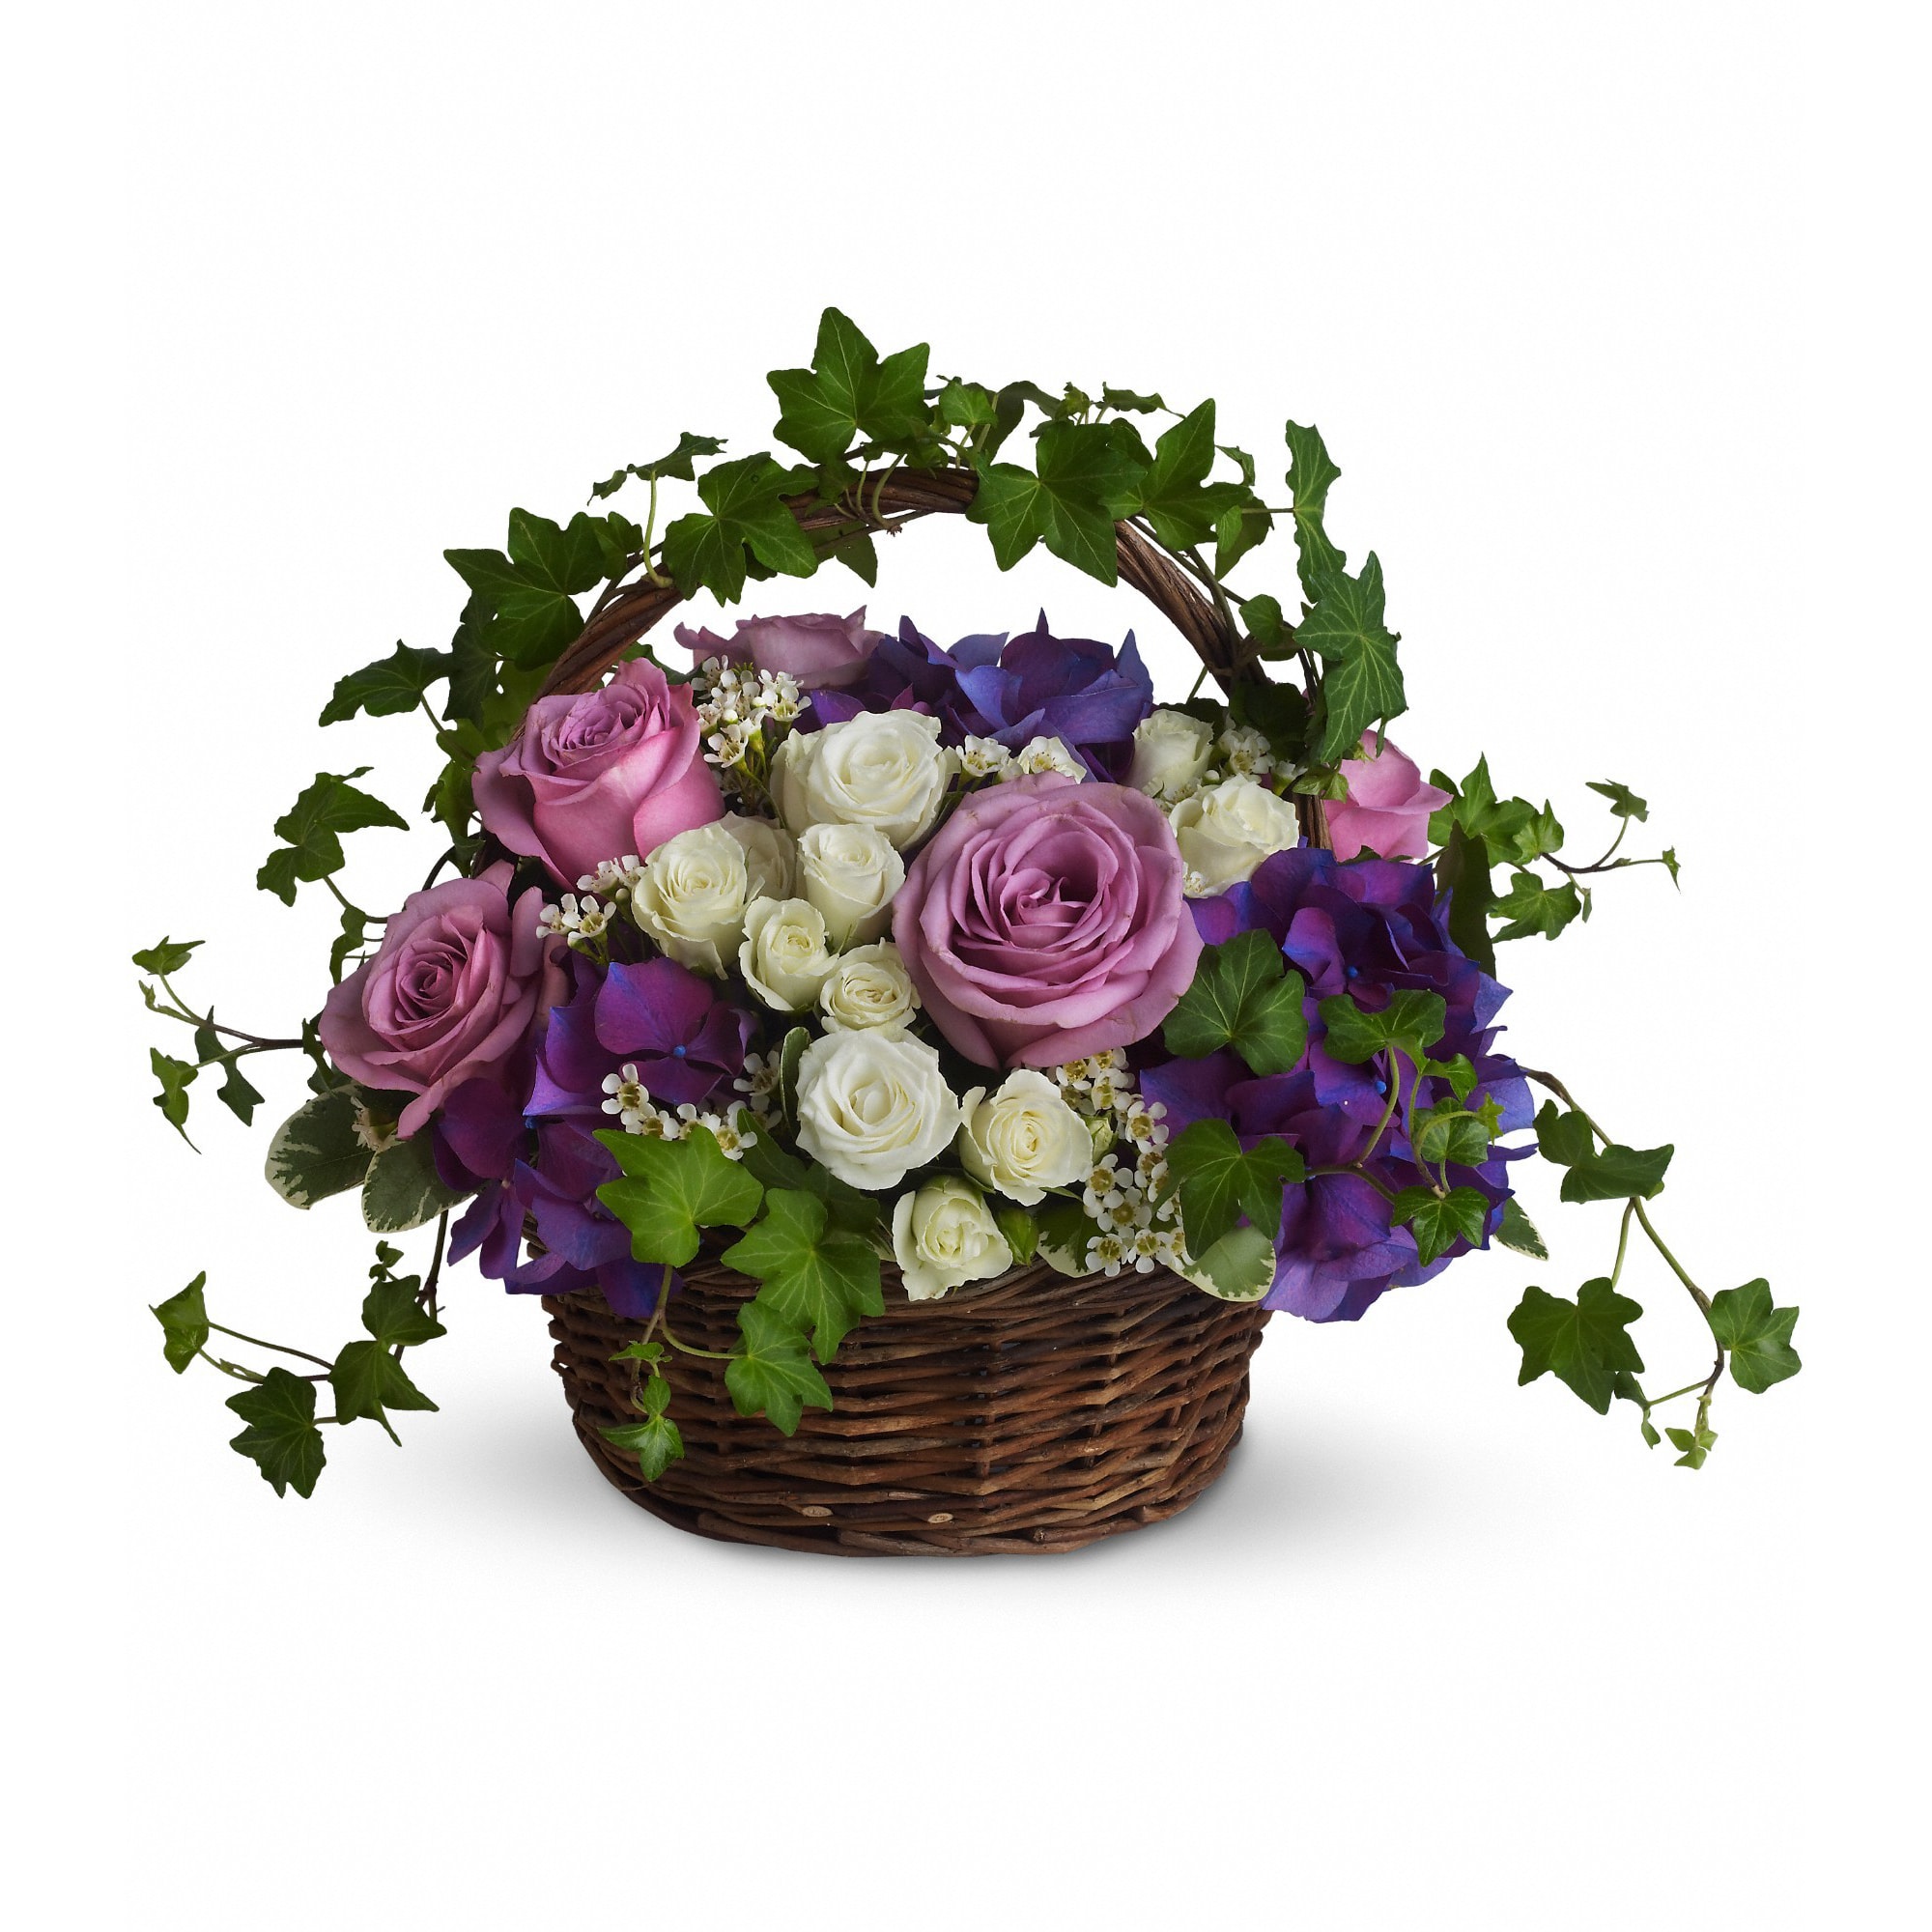 A Full Life by Teleflora - Even in mourning it is important to remember and honor a life well lived. This beautiful basket of purple and white flowers blended with vibrant greenery is a wonderful way to pay tribute to one who has indeed lived a full life.    Brilliant flowers such as purple hydrangea, lavender roses, white spray roses and waxflower are arranged with beautiful ivy and more in a lovely round basket.    Approximately 16 3/4&quot; W x 12 1/2&quot; H    Orientation: All-Around        As Shown : T211-1A      Deluxe : T211-1B      Premium : T211-1C    